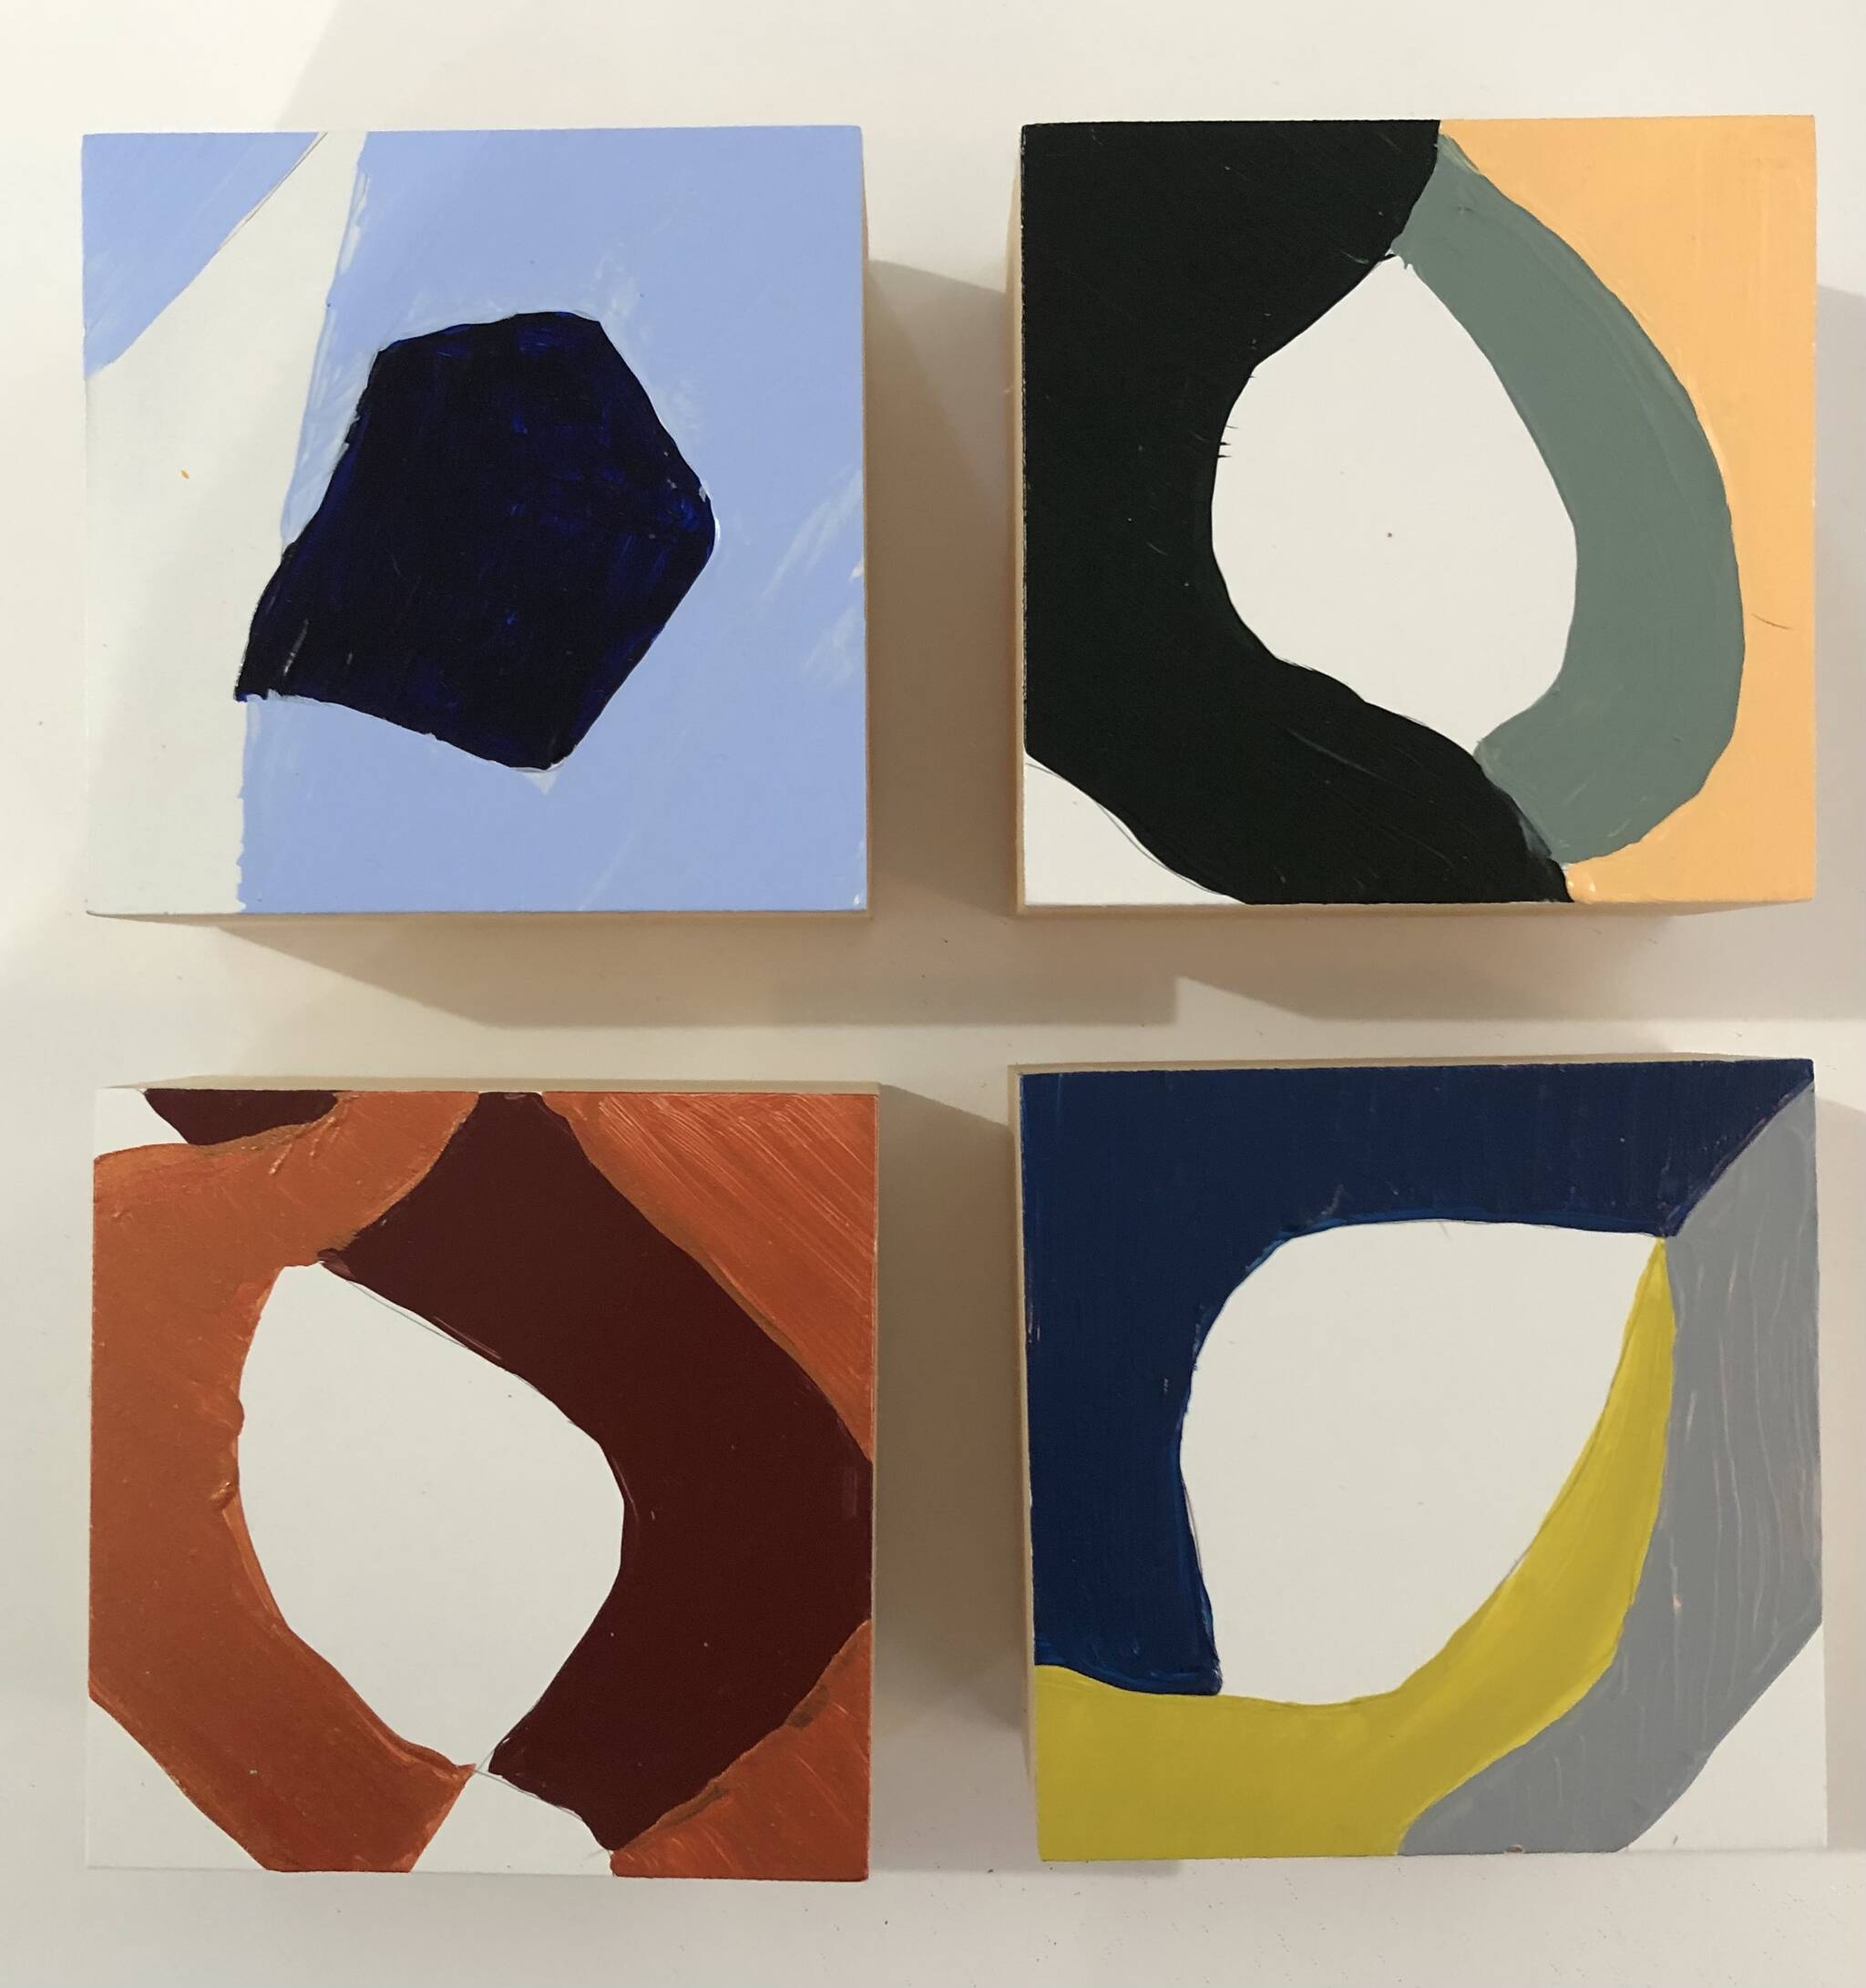 A series of small square abstract paintings by Barbara Mosher will be available for sale at the upcoming Whidbey Art Market. (Photo provided)